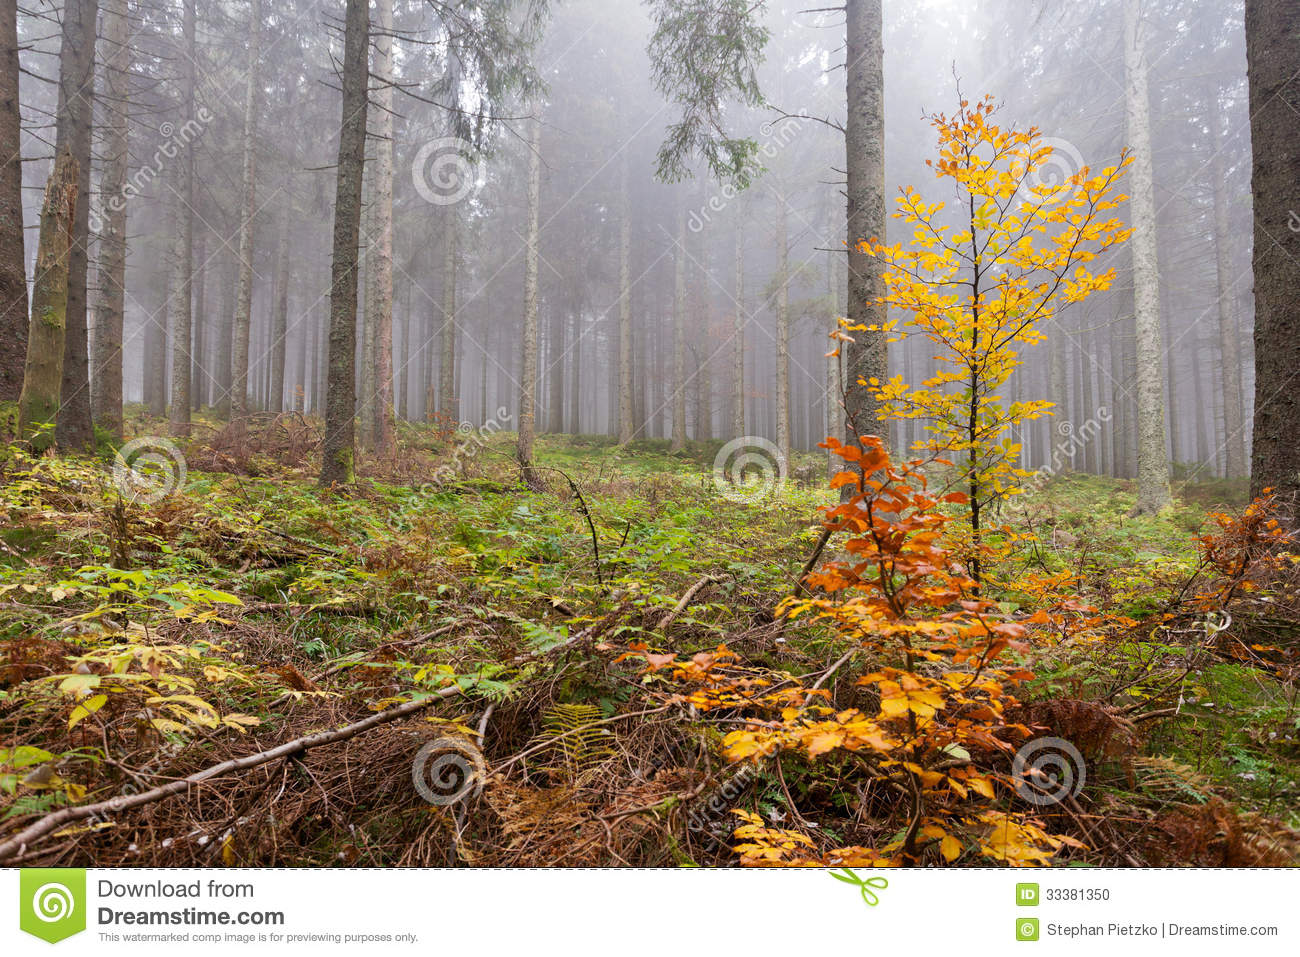 Wet And Foggy Peaceful Fall Day In The Forest With Tall Old Coniferous